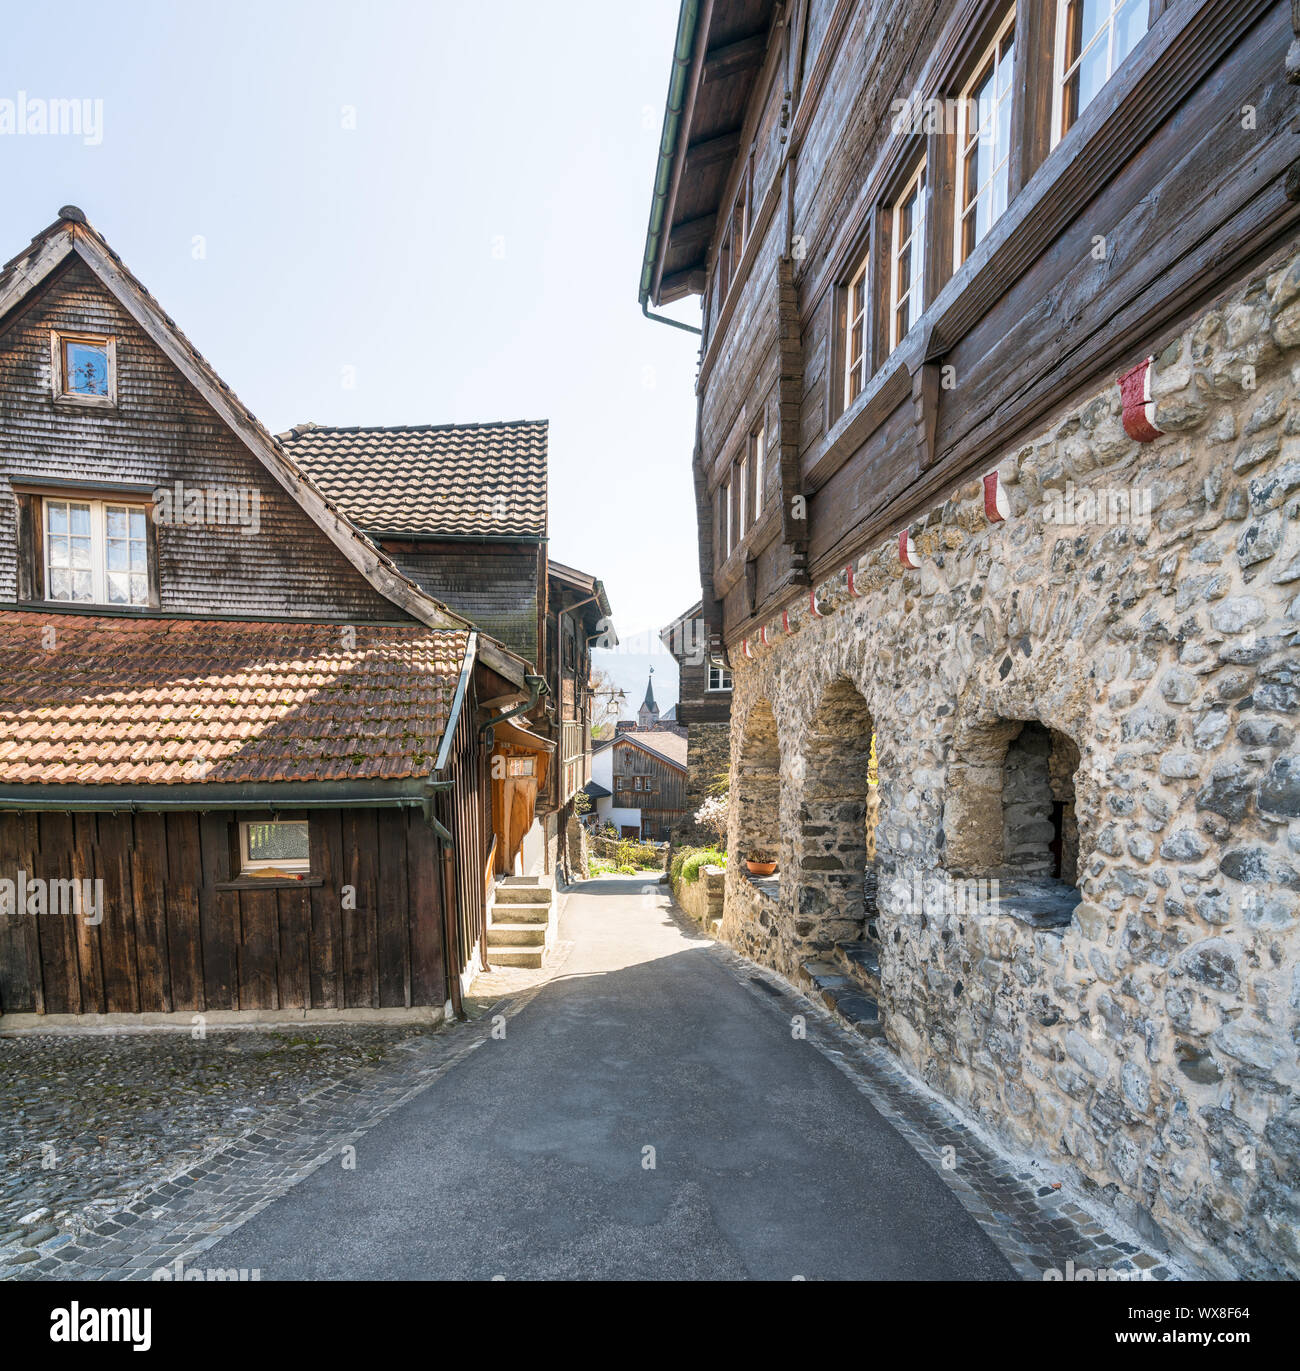 Werdenberg, SG / Switzerland - March 31, 2019: Werdenberg village with historic and traditional buil Stock Photo